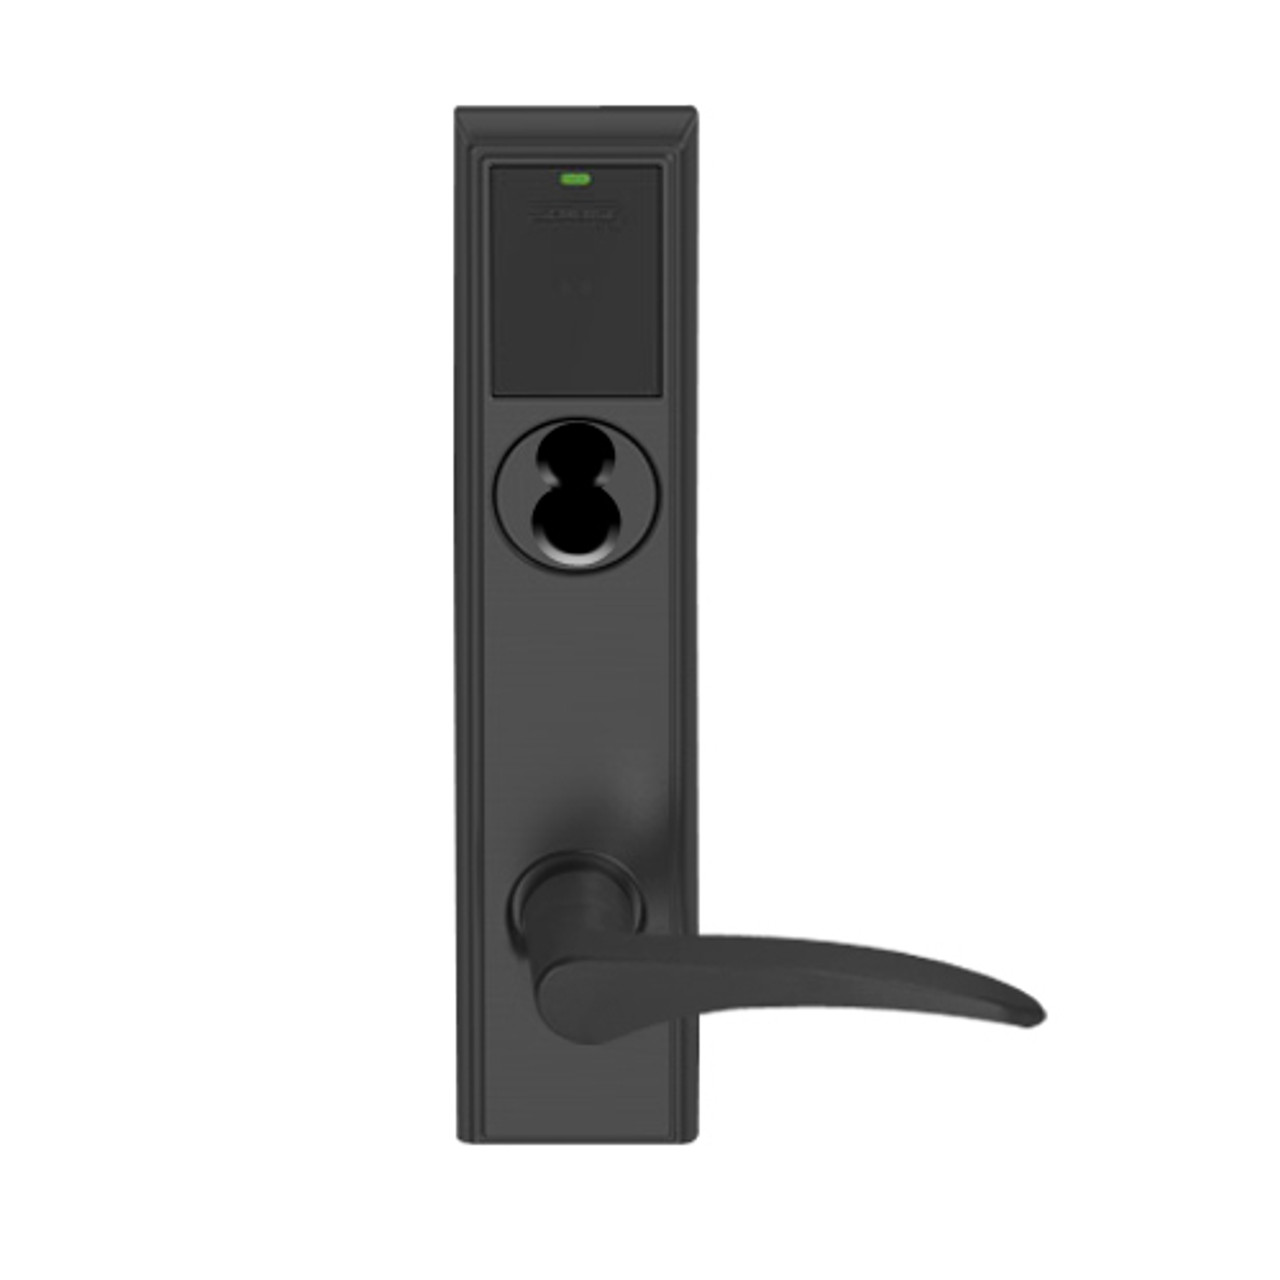 LEMS-ADD-J-12-622-LH Schlage Storeroom Wireless Addison Mortise Lock with LED and 12 Lever Prepped for FSIC in Matte Black